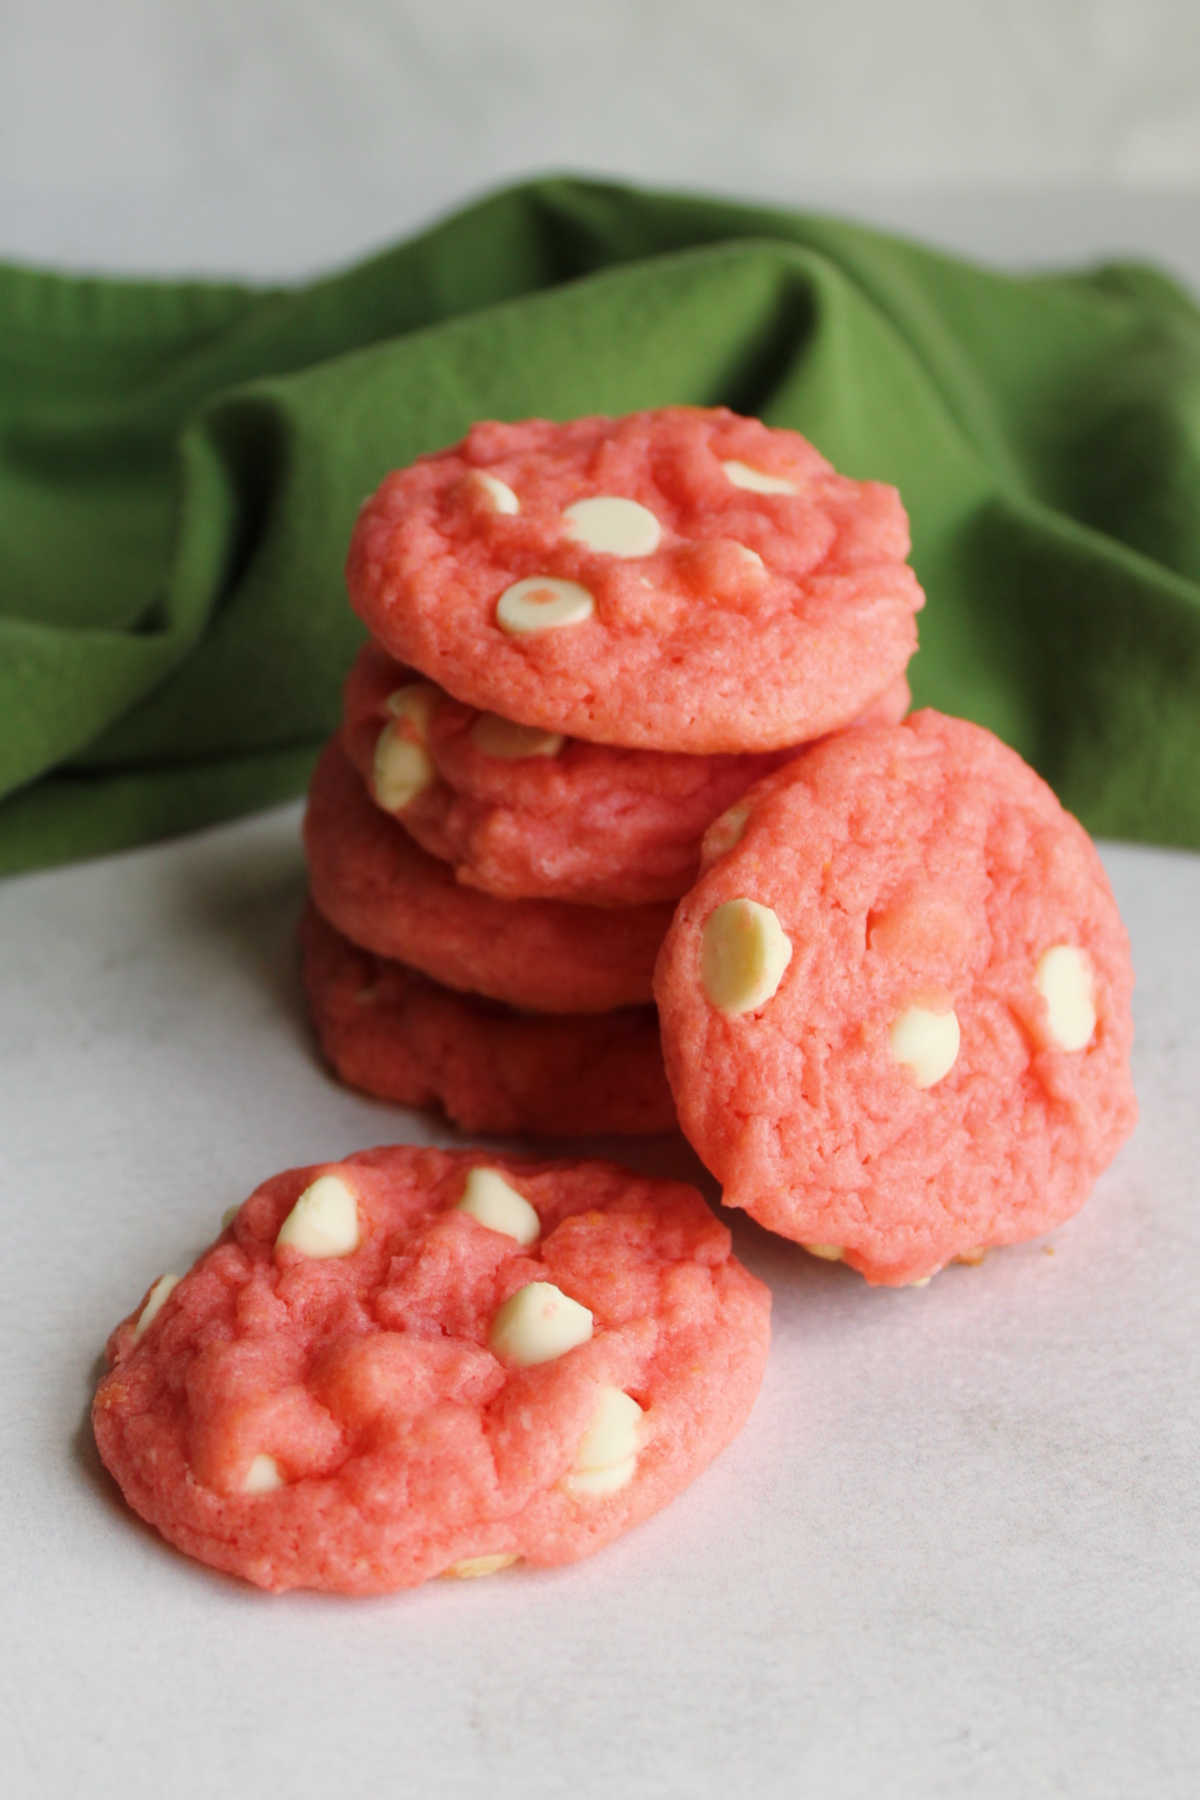 Several soft pink cookies with white chocolate chips.